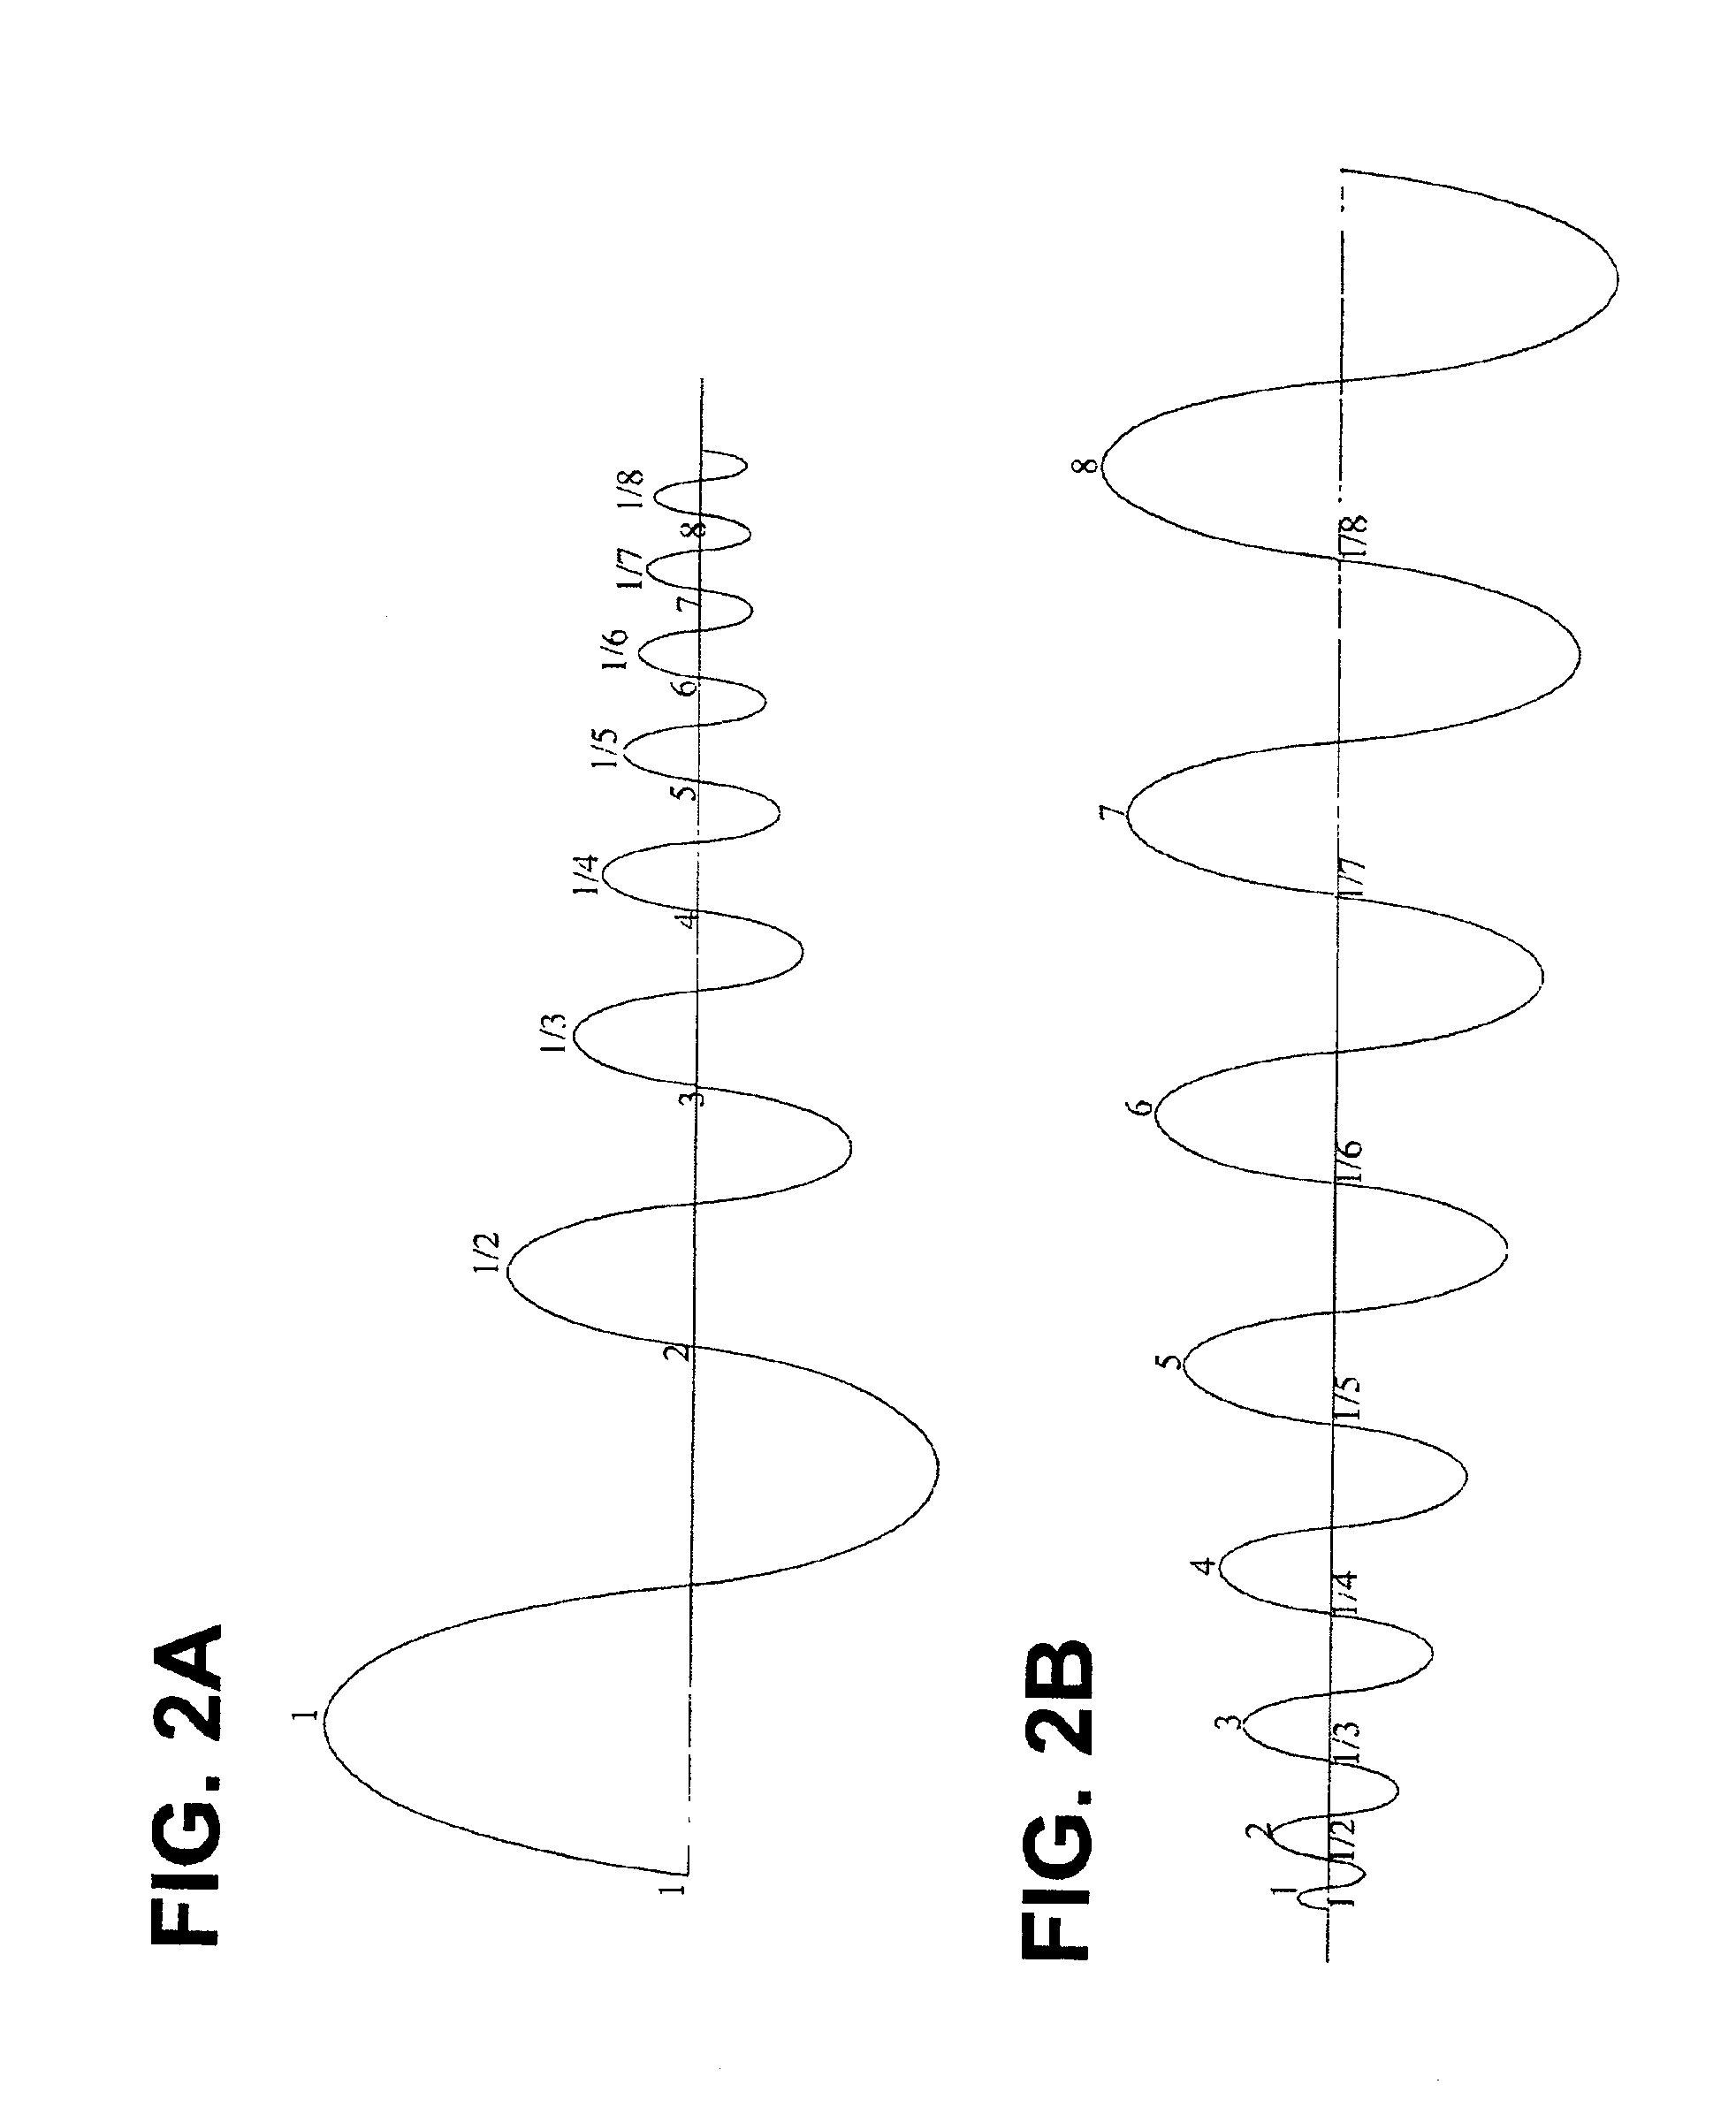 System and method for relating electromagnetic waves to sound waves